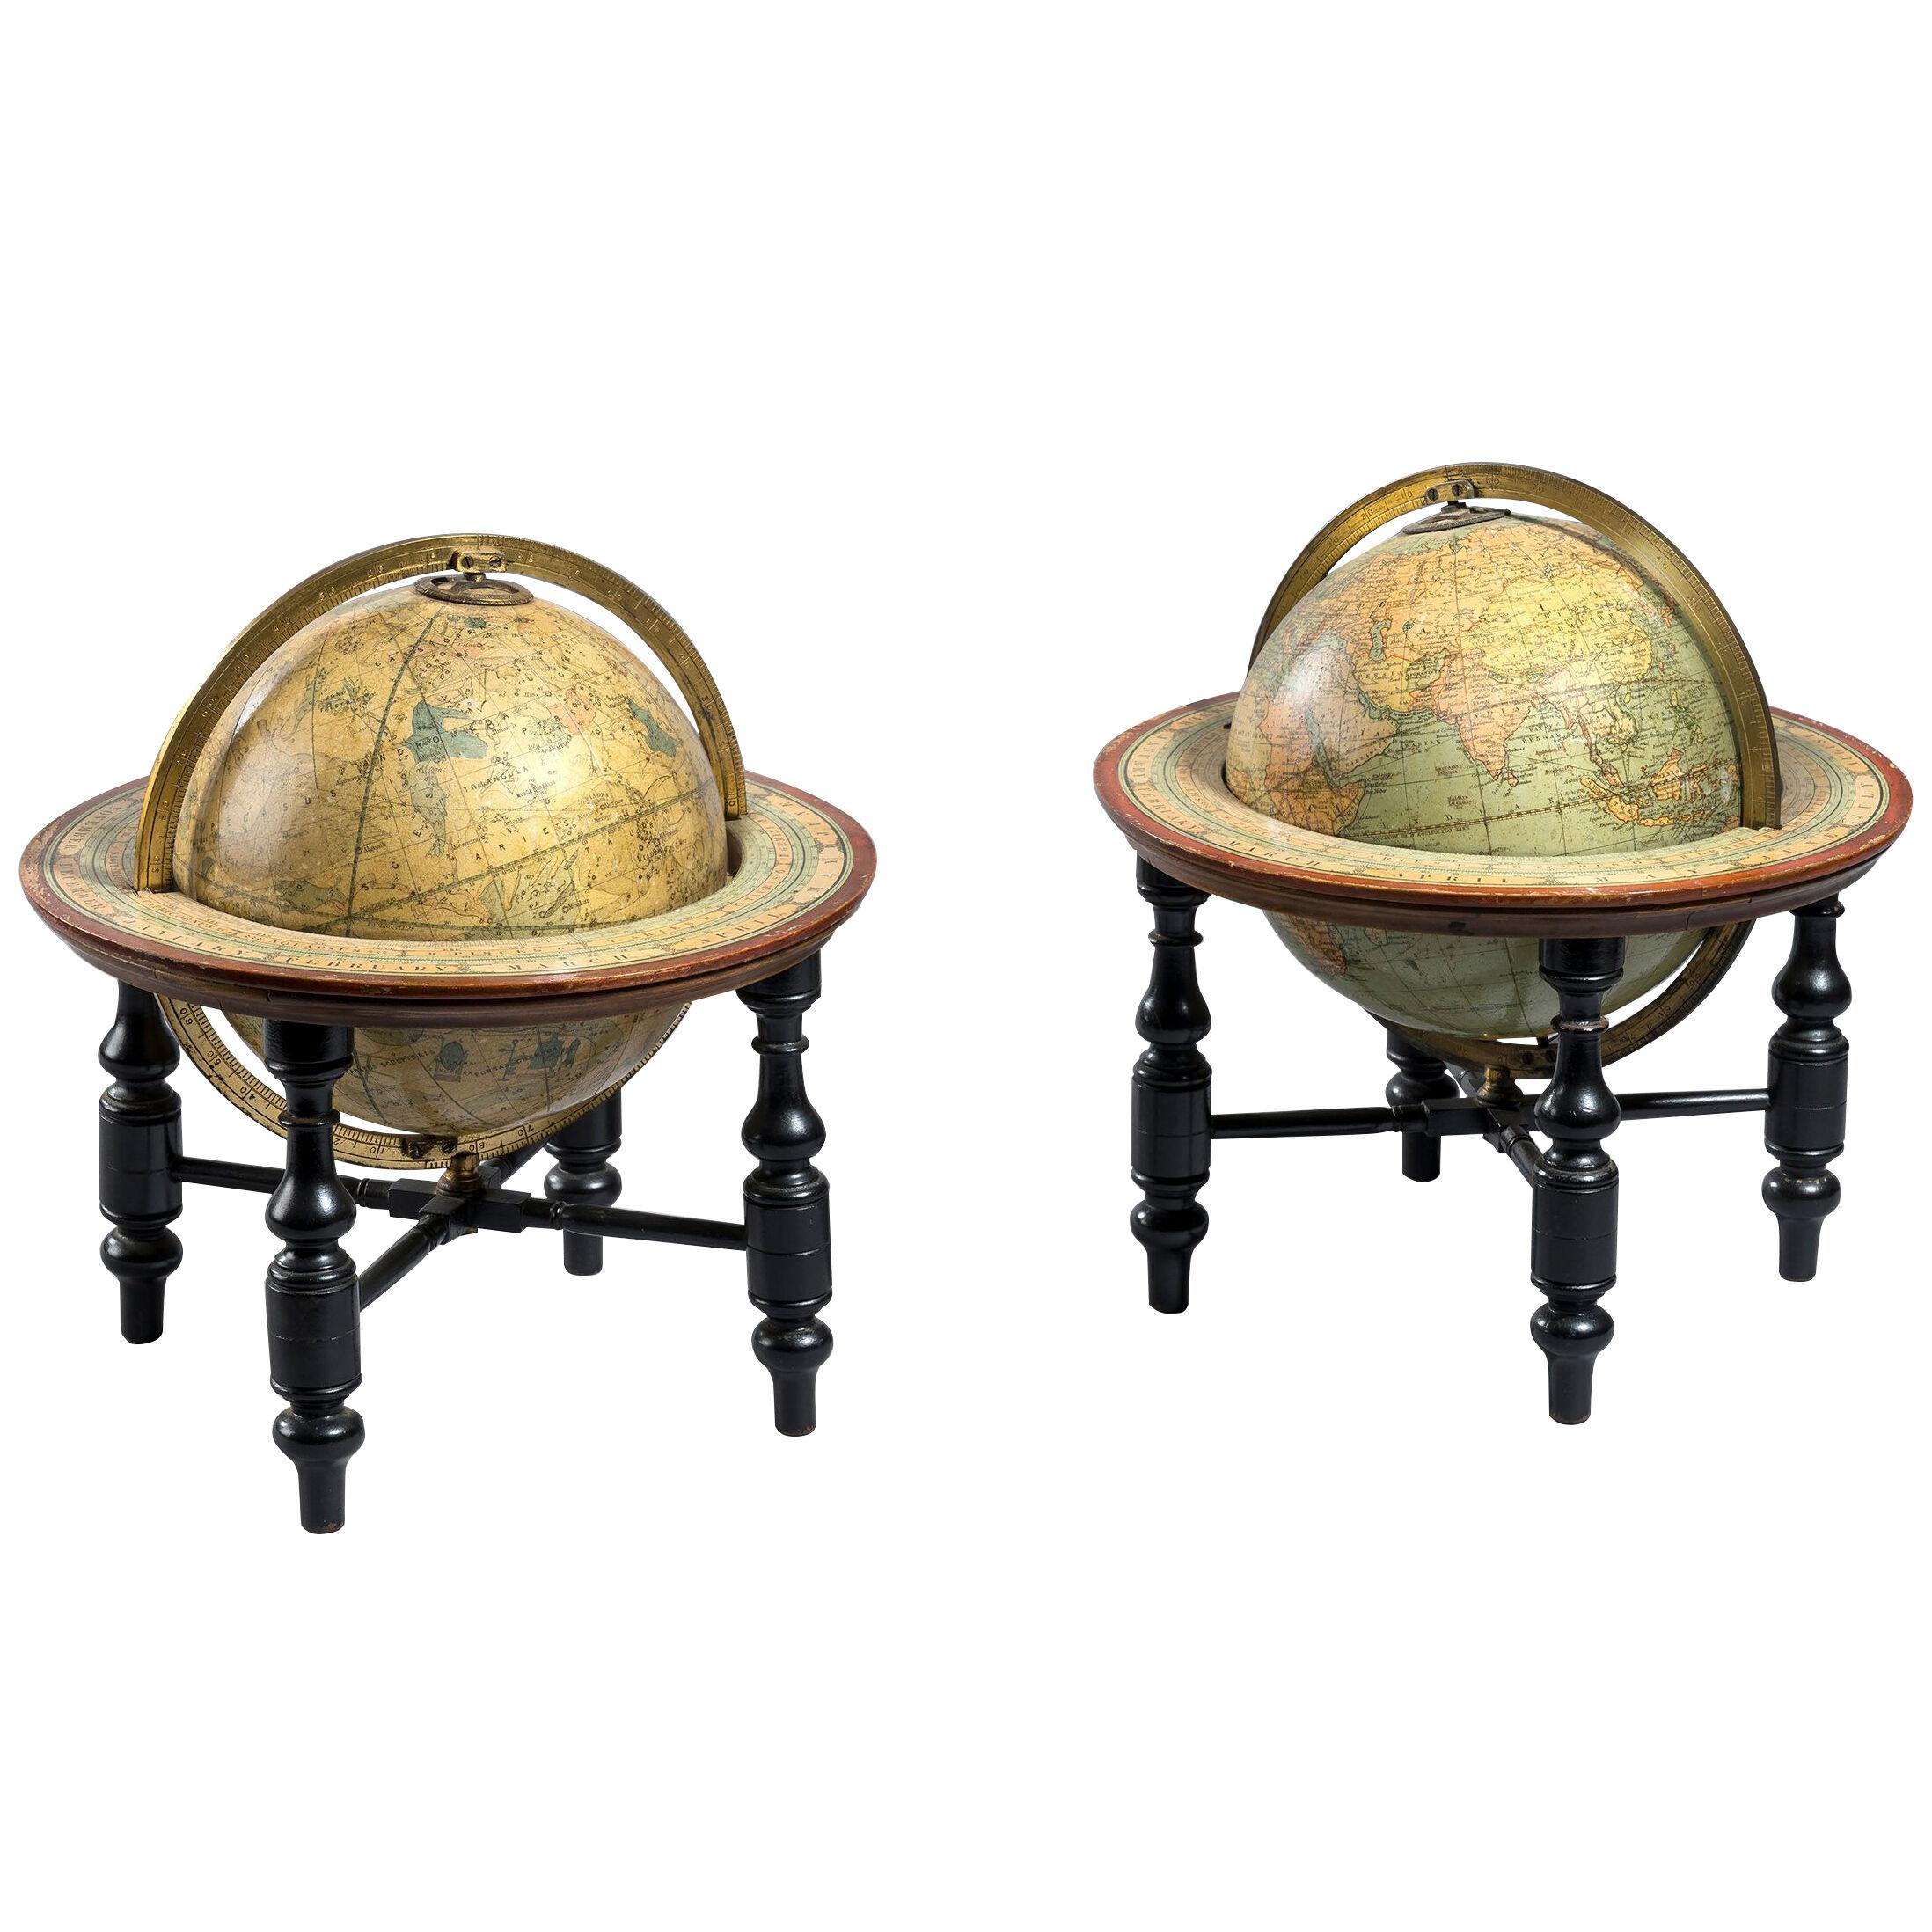 Small pair of 19th century table globes